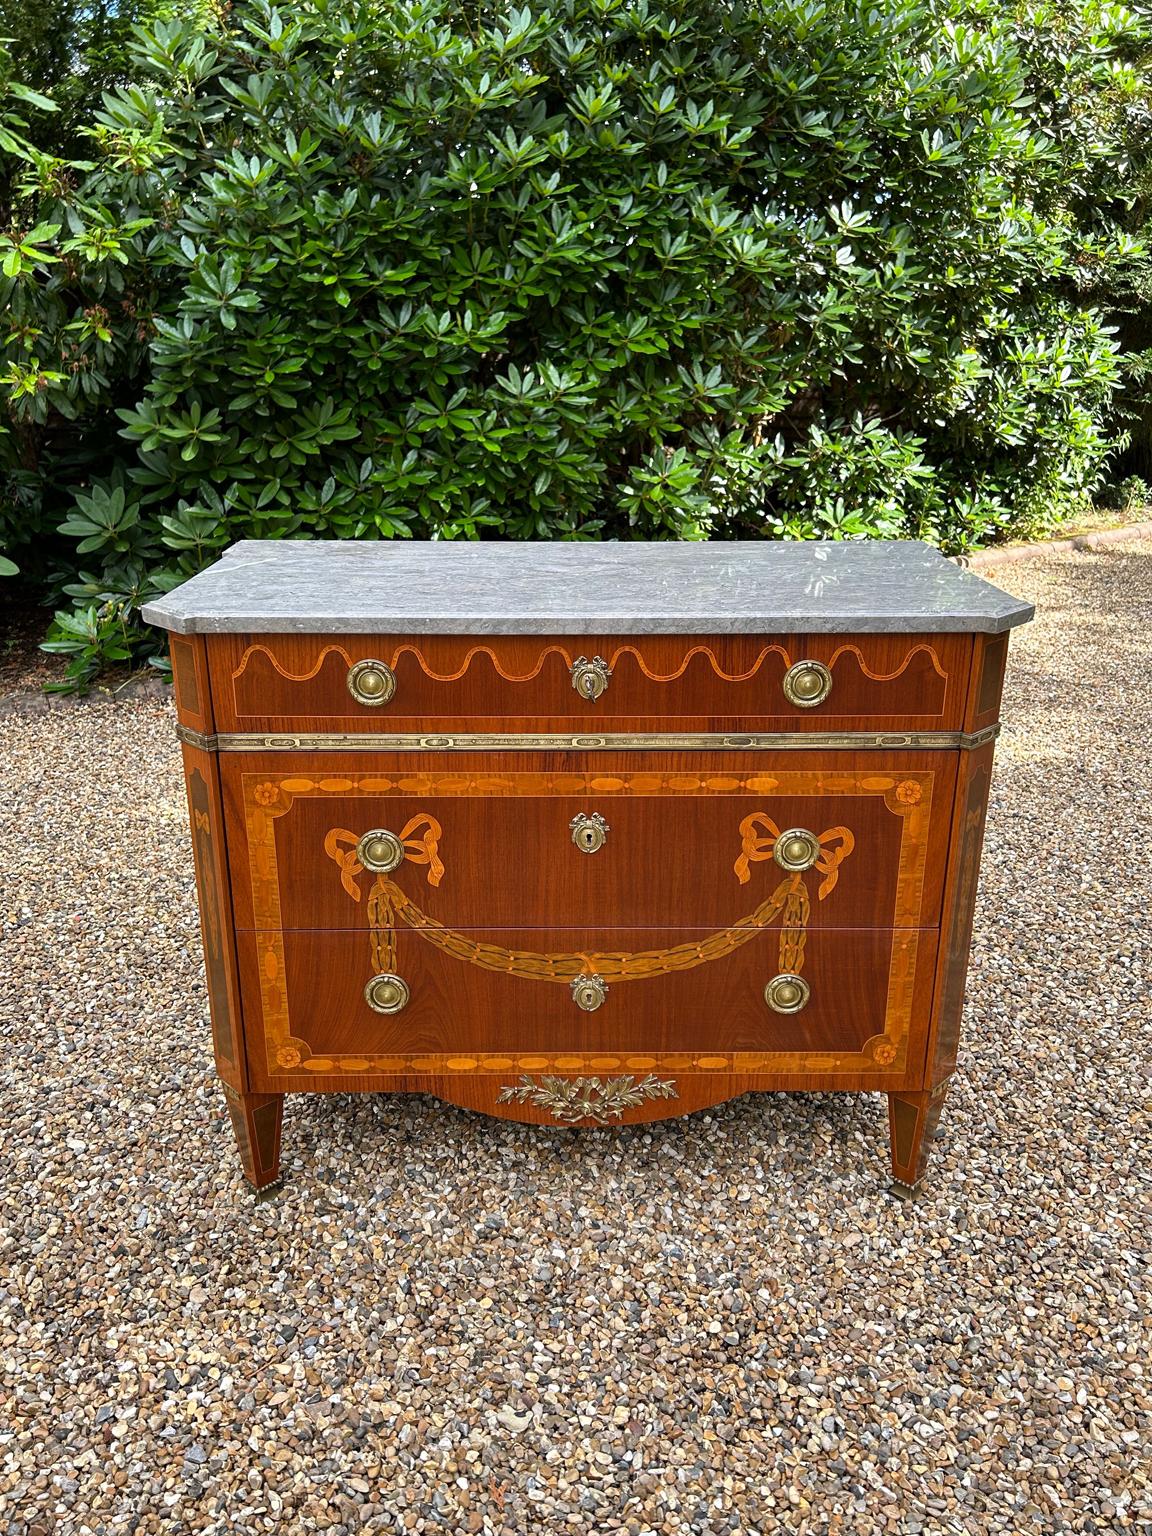 A super quality Edwardian French Commode / Chest of Drawers with beautiful inlay of various woods throughout. A solid removable Marble top, three drawers and original french brass fittings and handles. The inlay work is amazing with floral